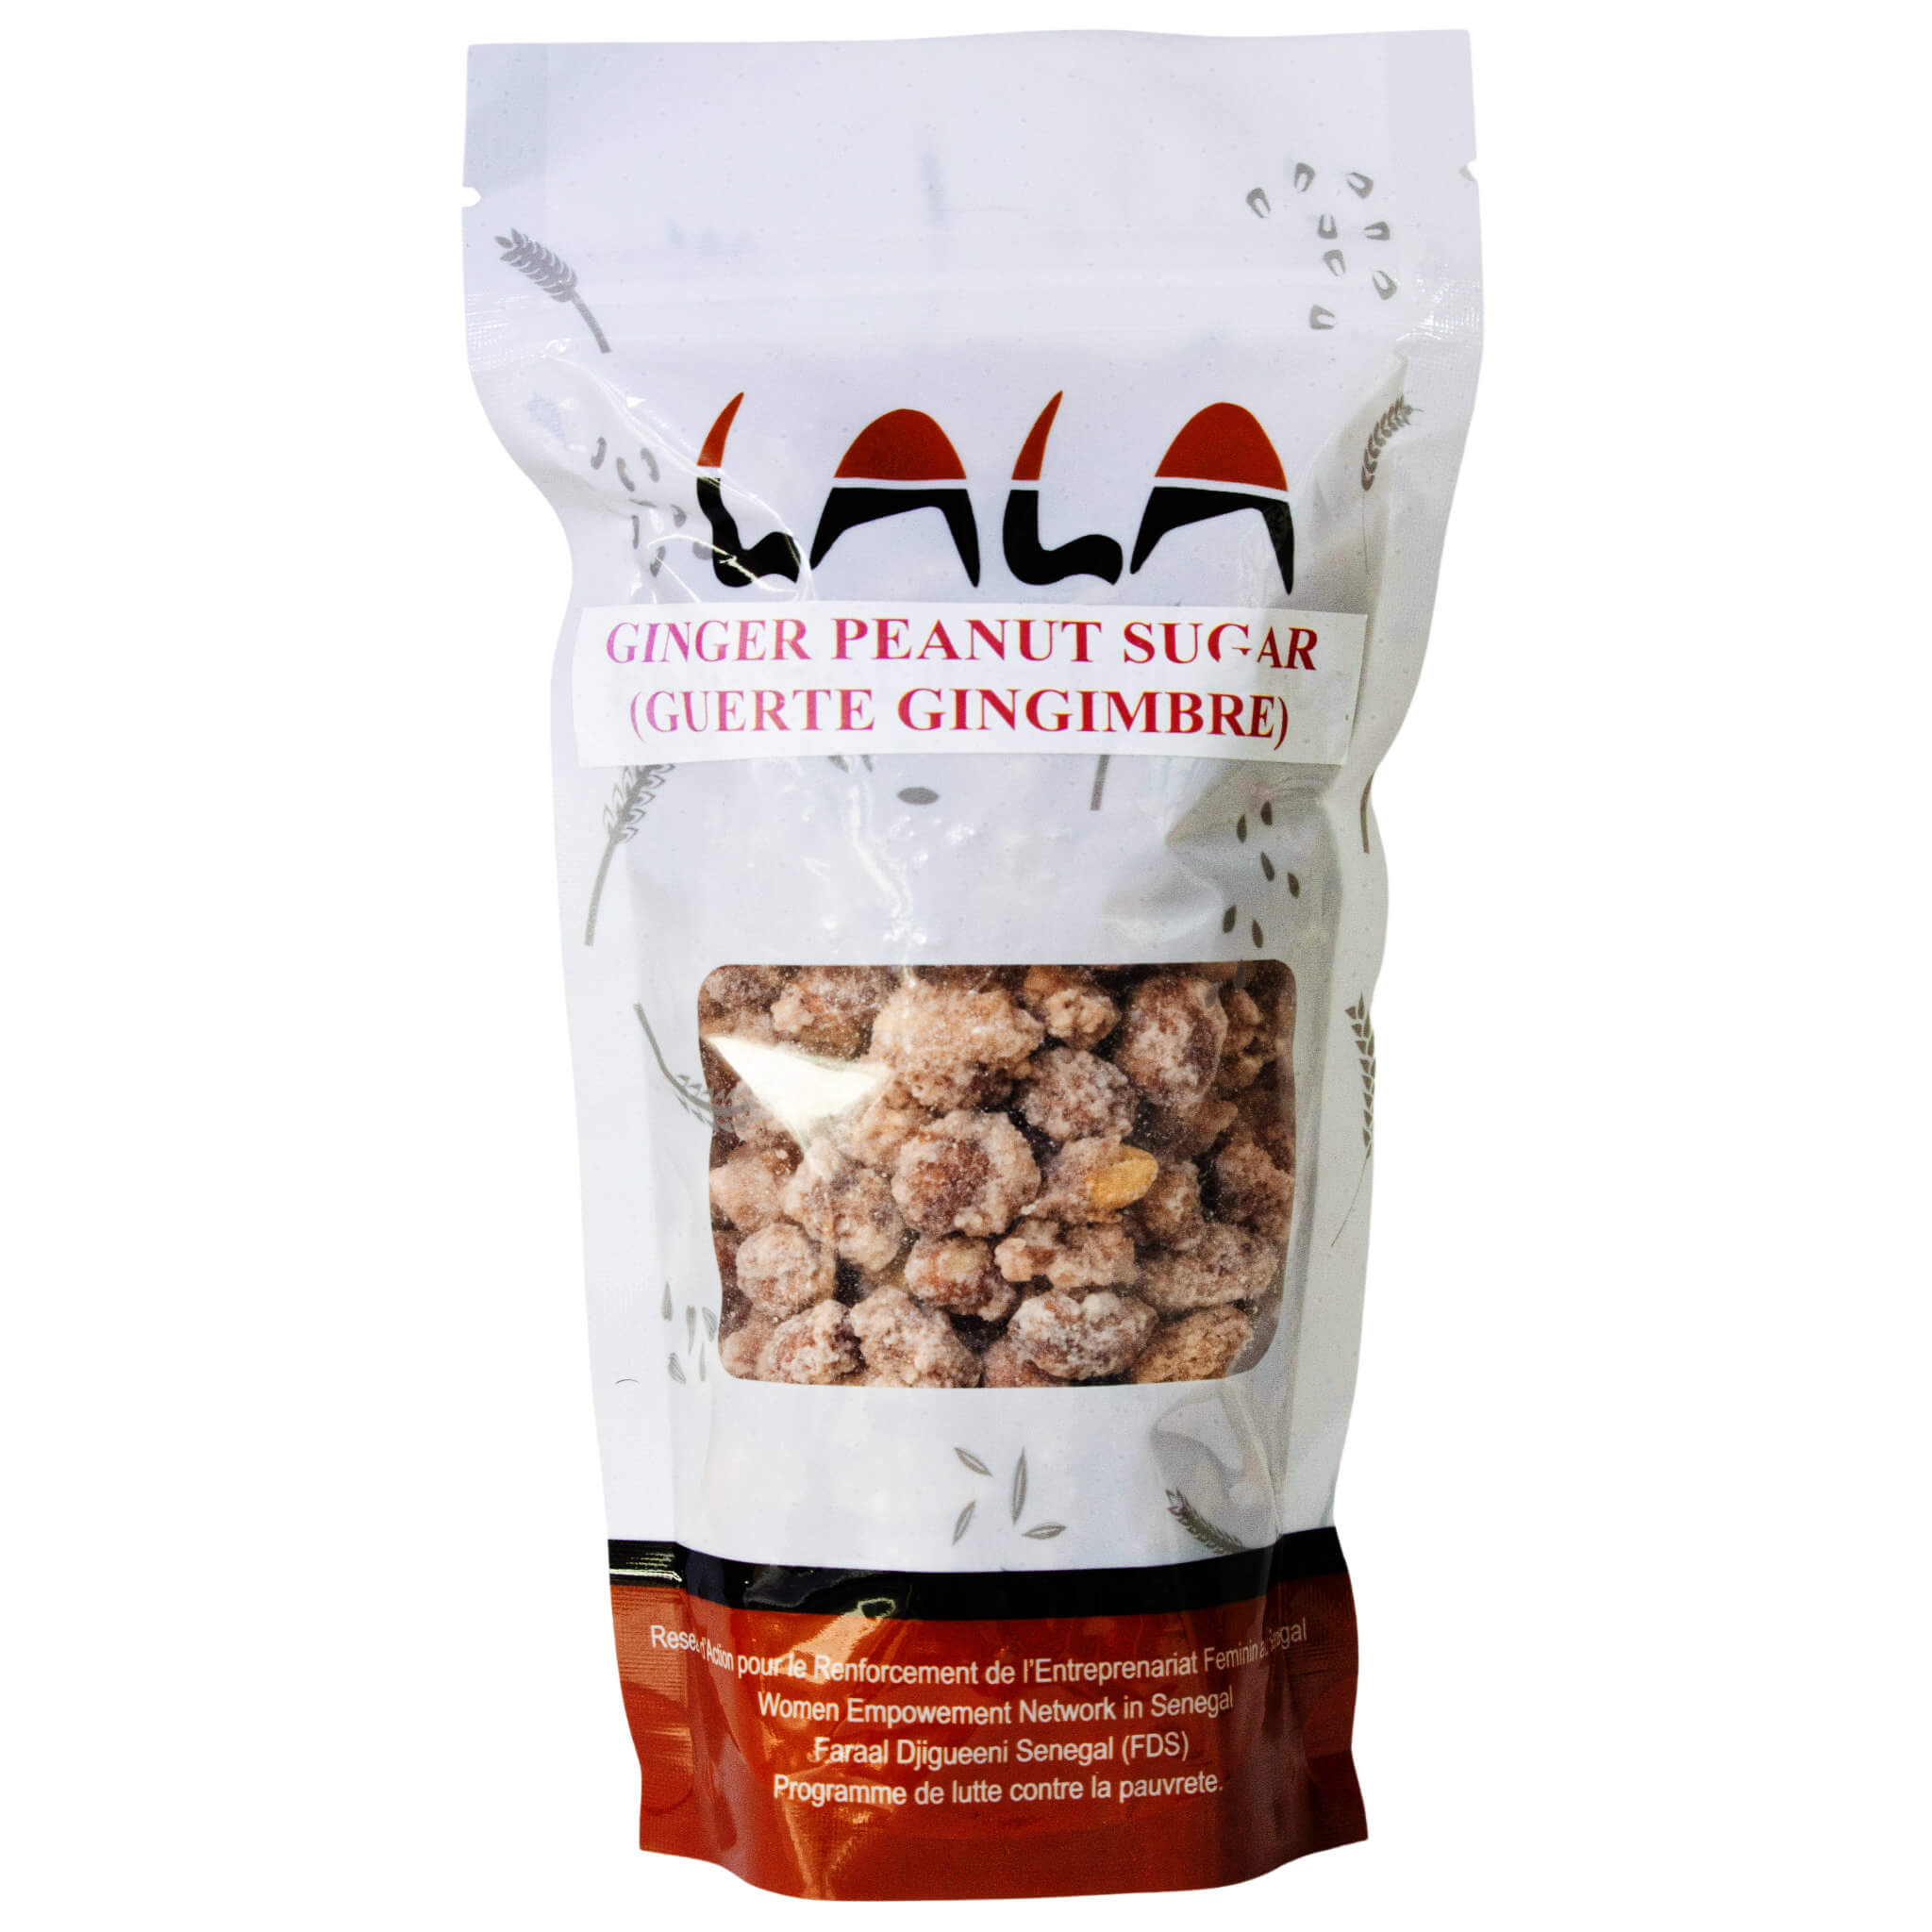 GUERTE SOUKEUR GINGEMBRE (CARAMILIZED GINGER CANDIED PEANUTS) 150G